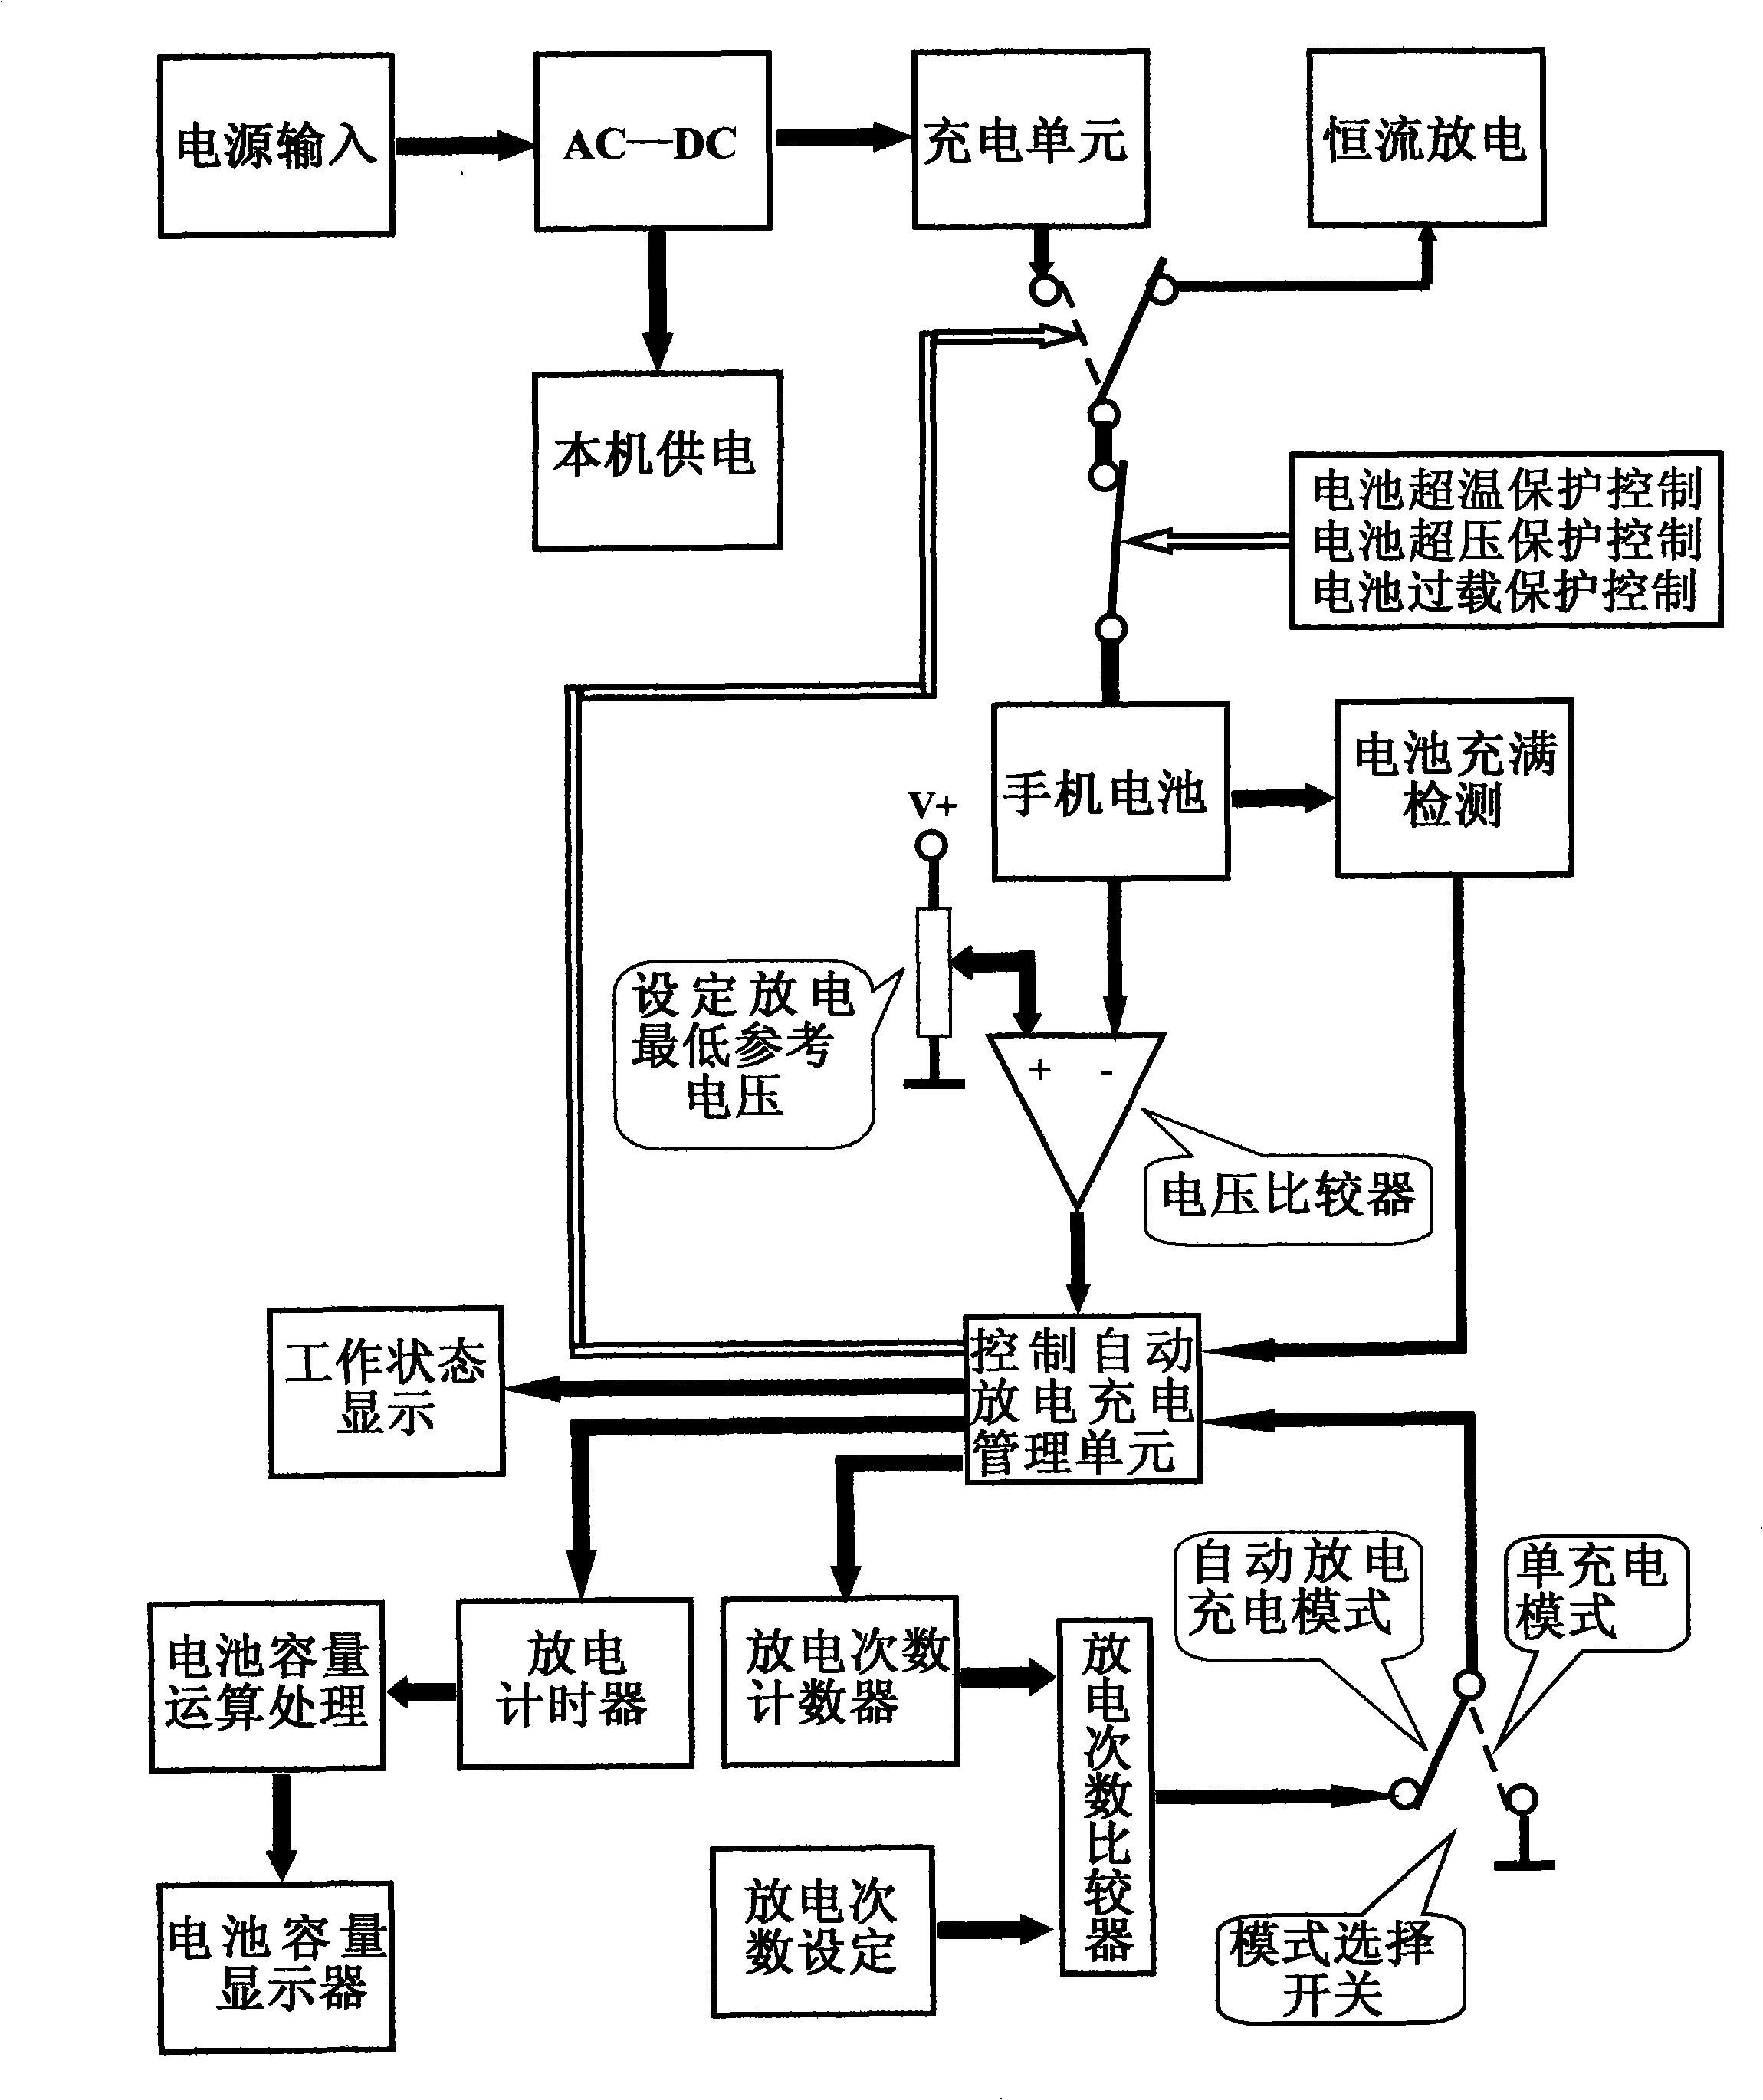 Mobile phone charger capable of carrying out automatic discharging/charging management and displaying battery capacity